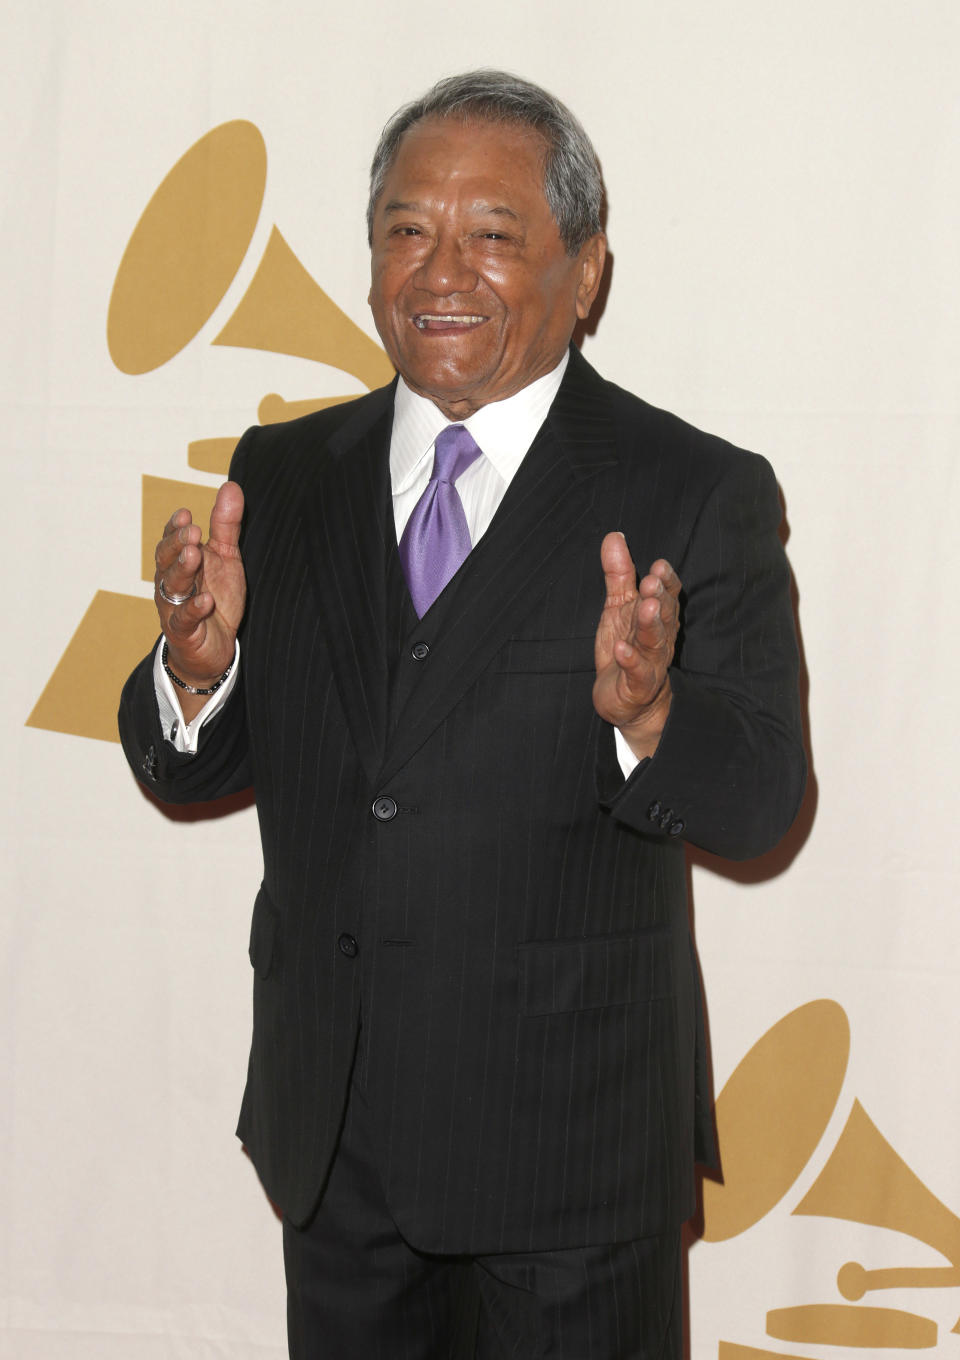 Armando Manzanero attends The 56th Annual GRAMMY Awards - Special Merit Awards Ceremony, on Saturday, Jan. 25, 2014 in Los Angeles. (Photo by Todd Williamson/Invision/AP)